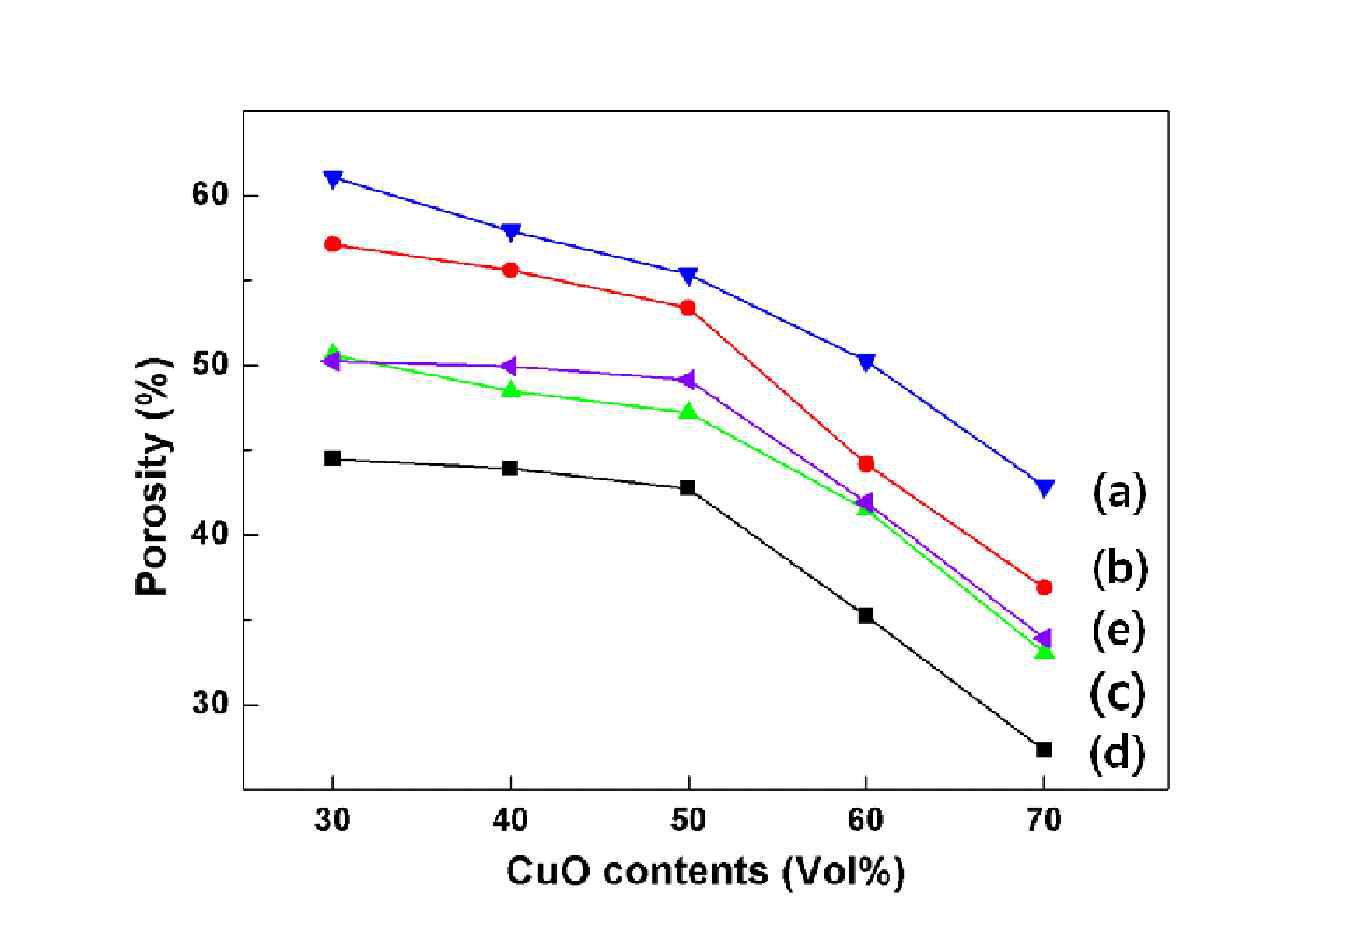 Porosity of the samples prepared in this study: CuO/YSZ composites sintered at (a) 1050 and (b) 1100 °C, 5% carbon black contained CuO/YSZ composites sintered at (c) 1050 and (d) 1100 °C, and (e) Cu/YSZ cermet sintered at 1100 °C followed by reduced at 800 °C.